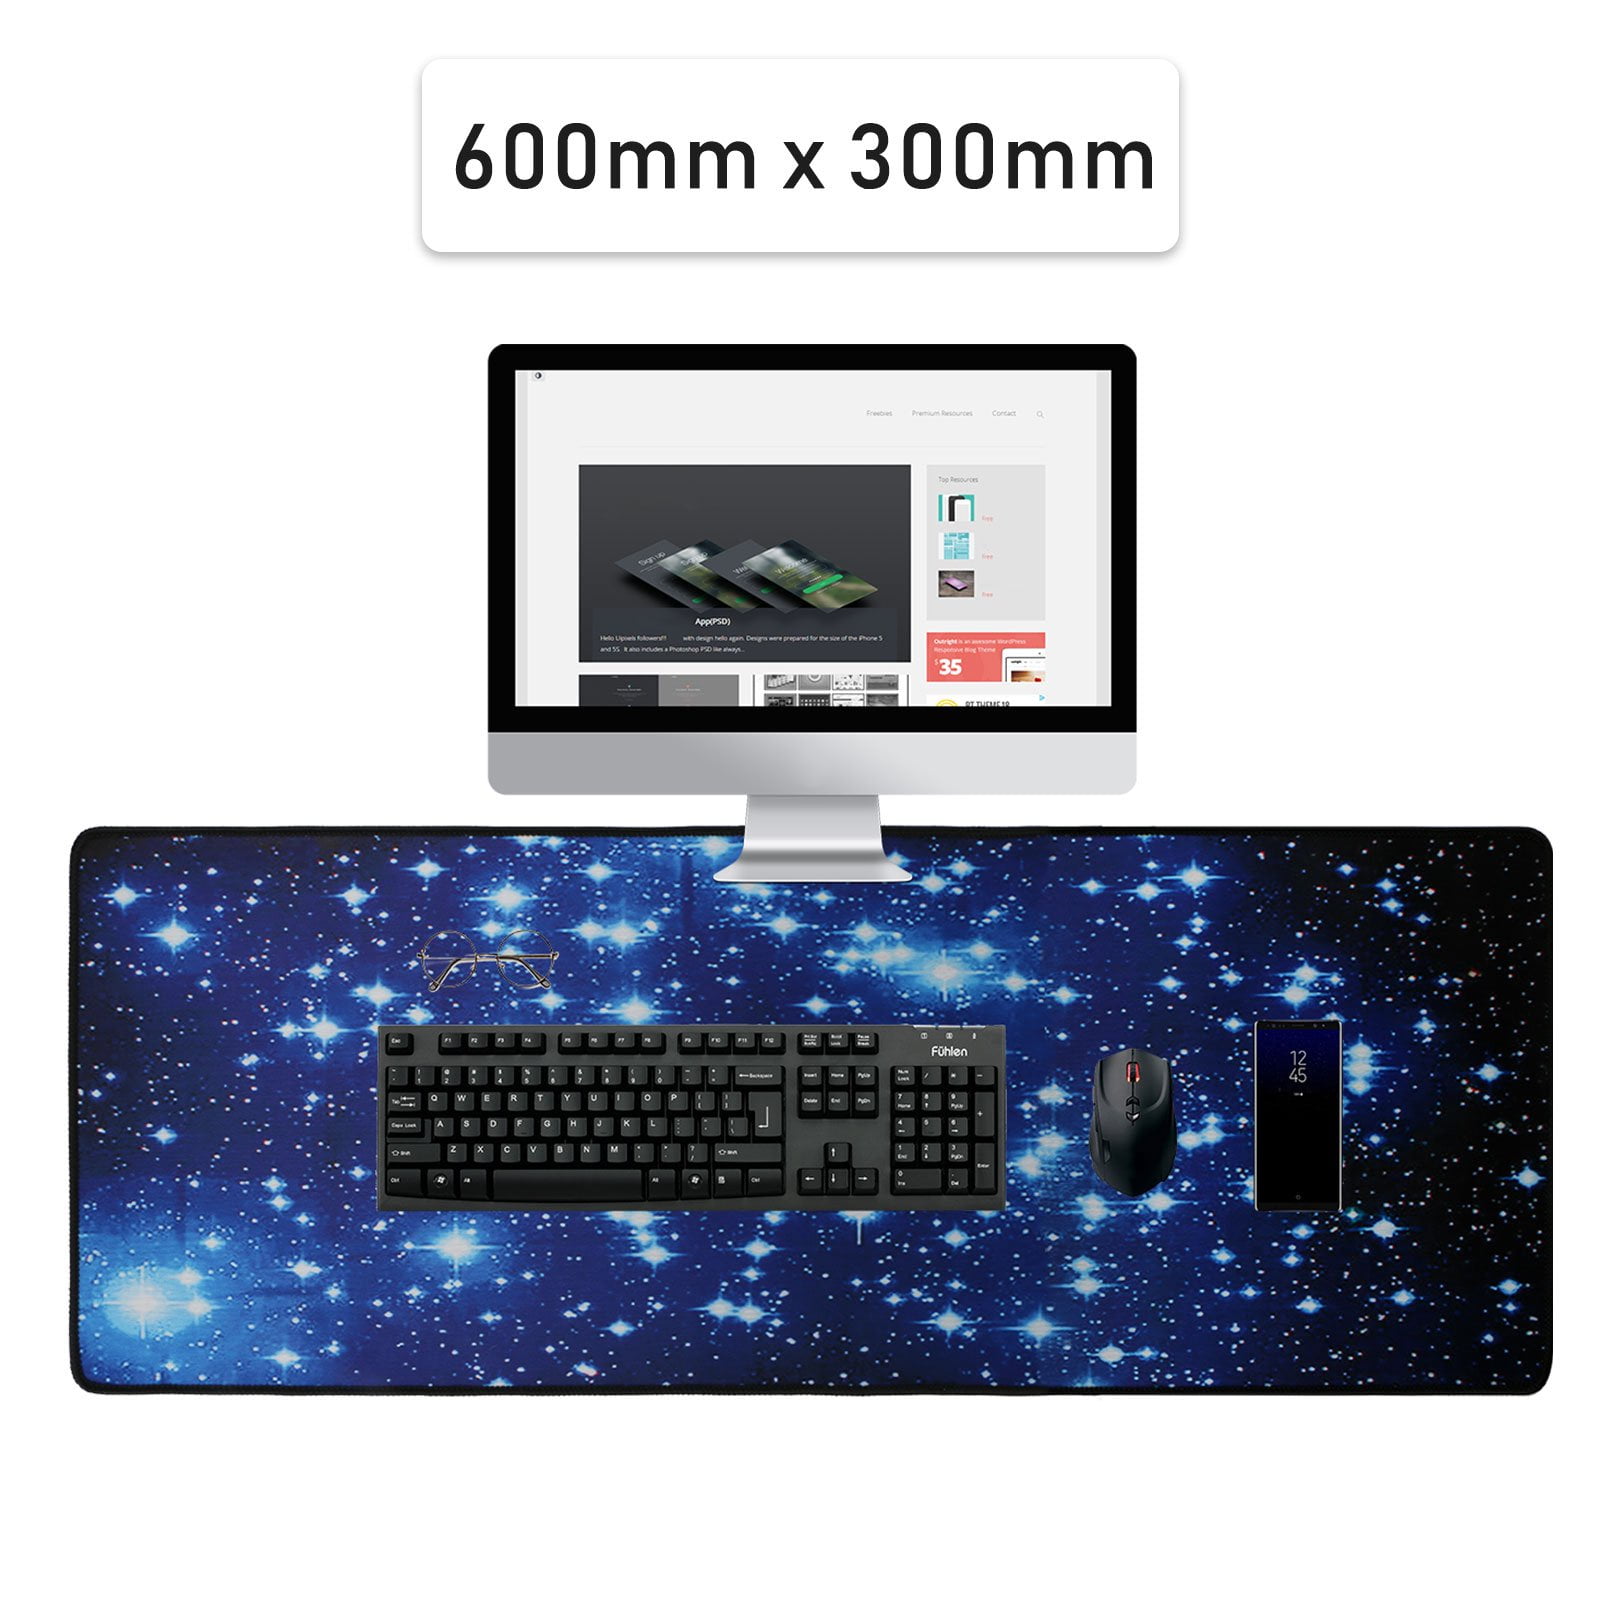 Keyboard Mat Gaming Mouse Pad Cool And Fashionable Dota2 Large Size High Quality 